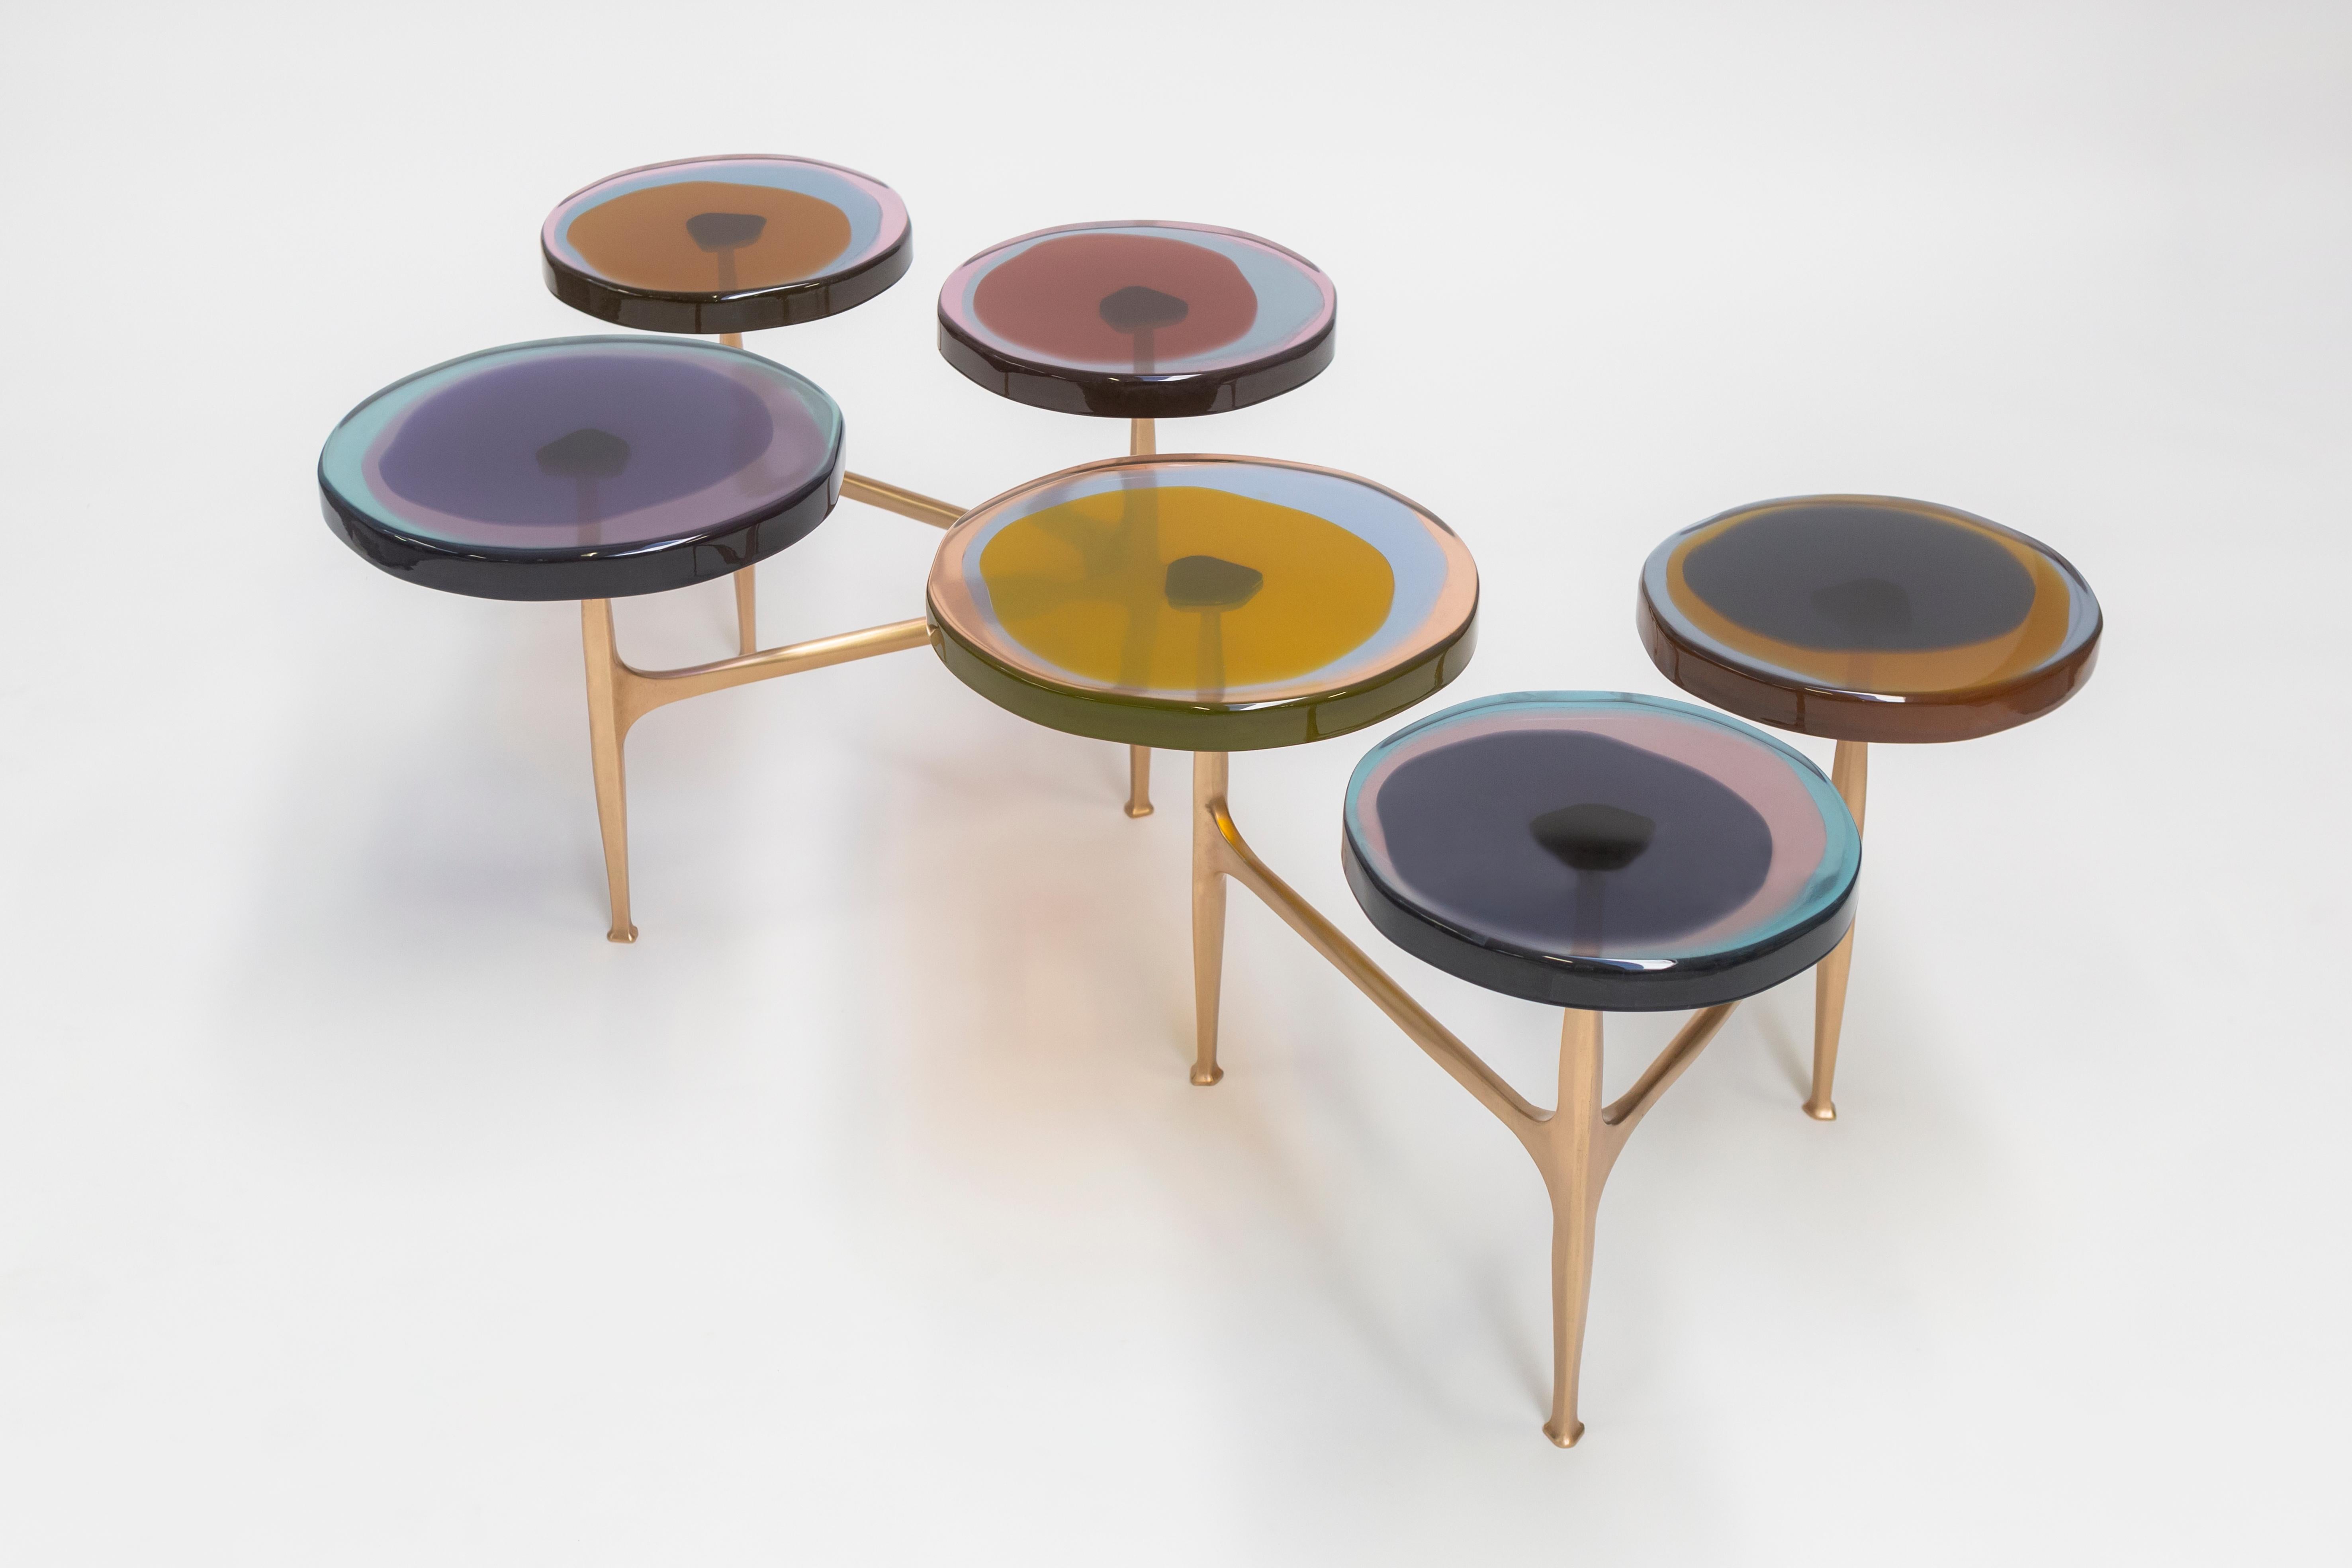 Agatha Coffe Table 3 by Draga & Aurel Resin and Bronze, 21st Century For Sale 2